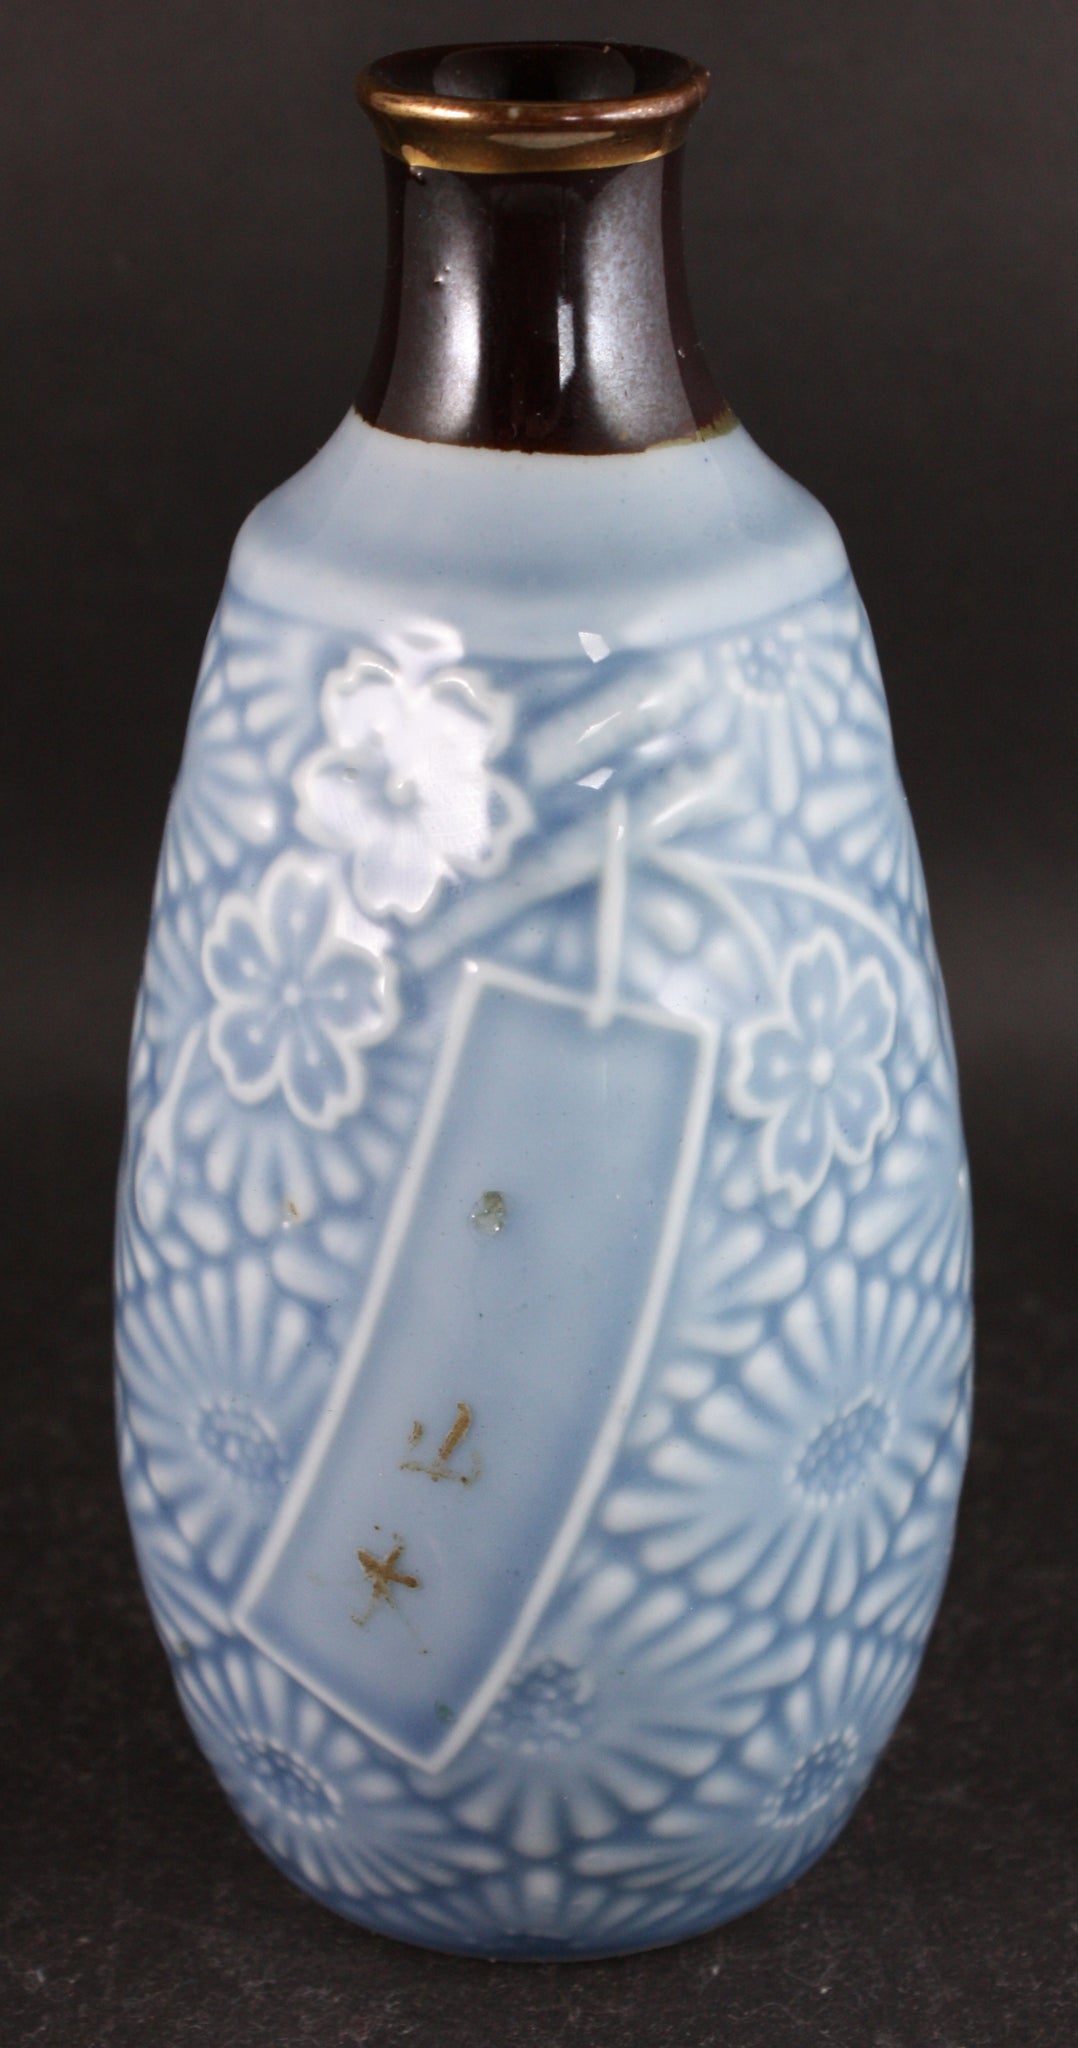 Antique Japanese Military Horse Blossoms Cavalry Army Sake Bottle